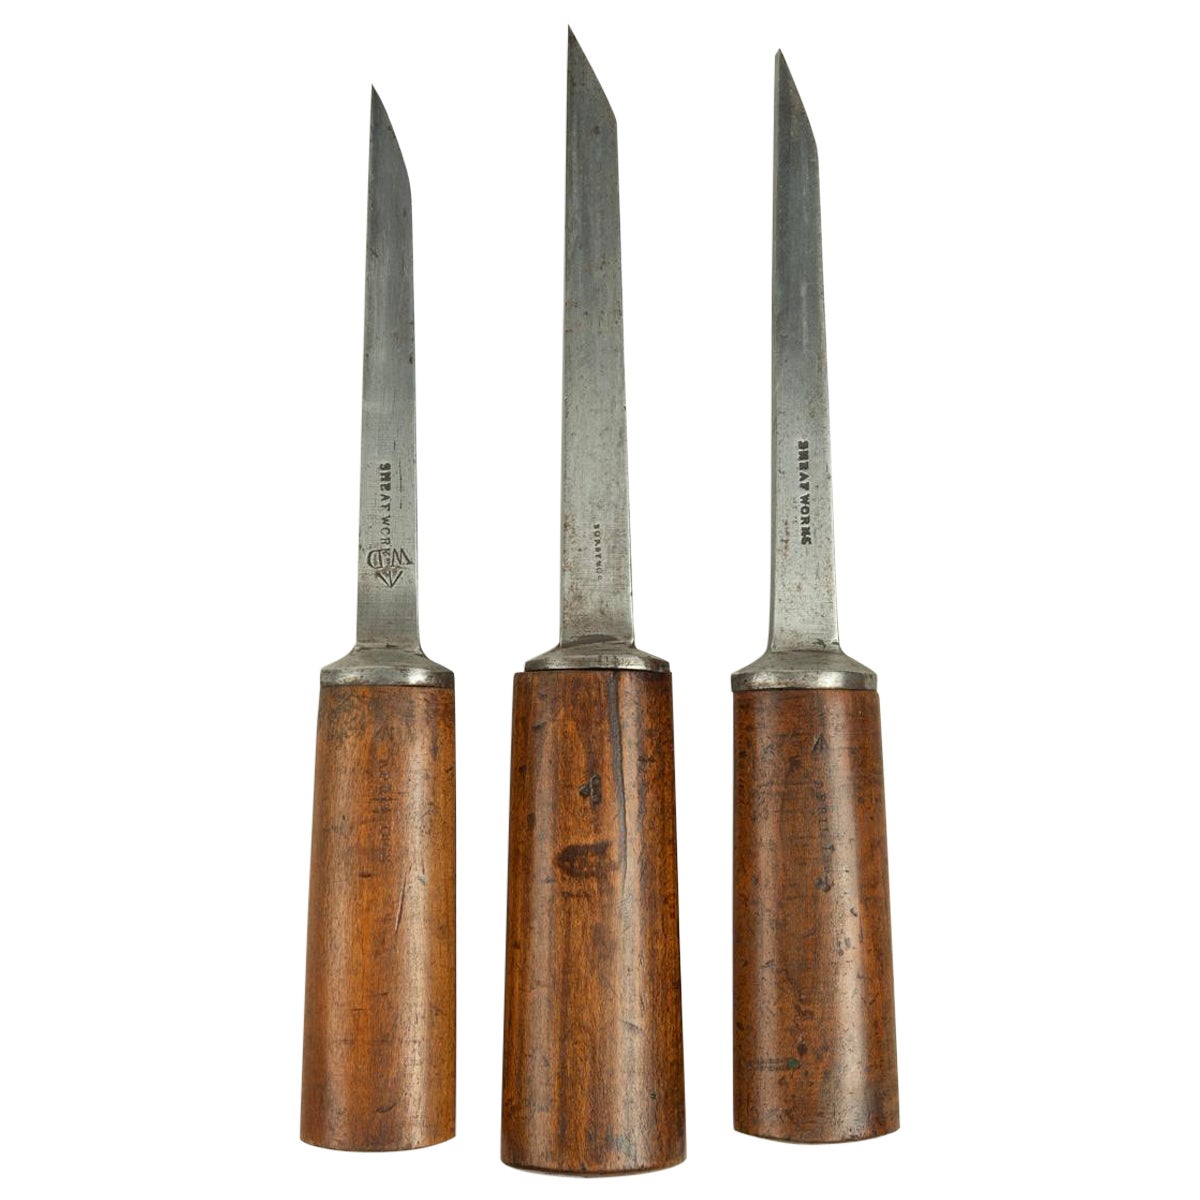 Three mortice chisels, all with sturdy ash handles by Sorby & Co For Sale